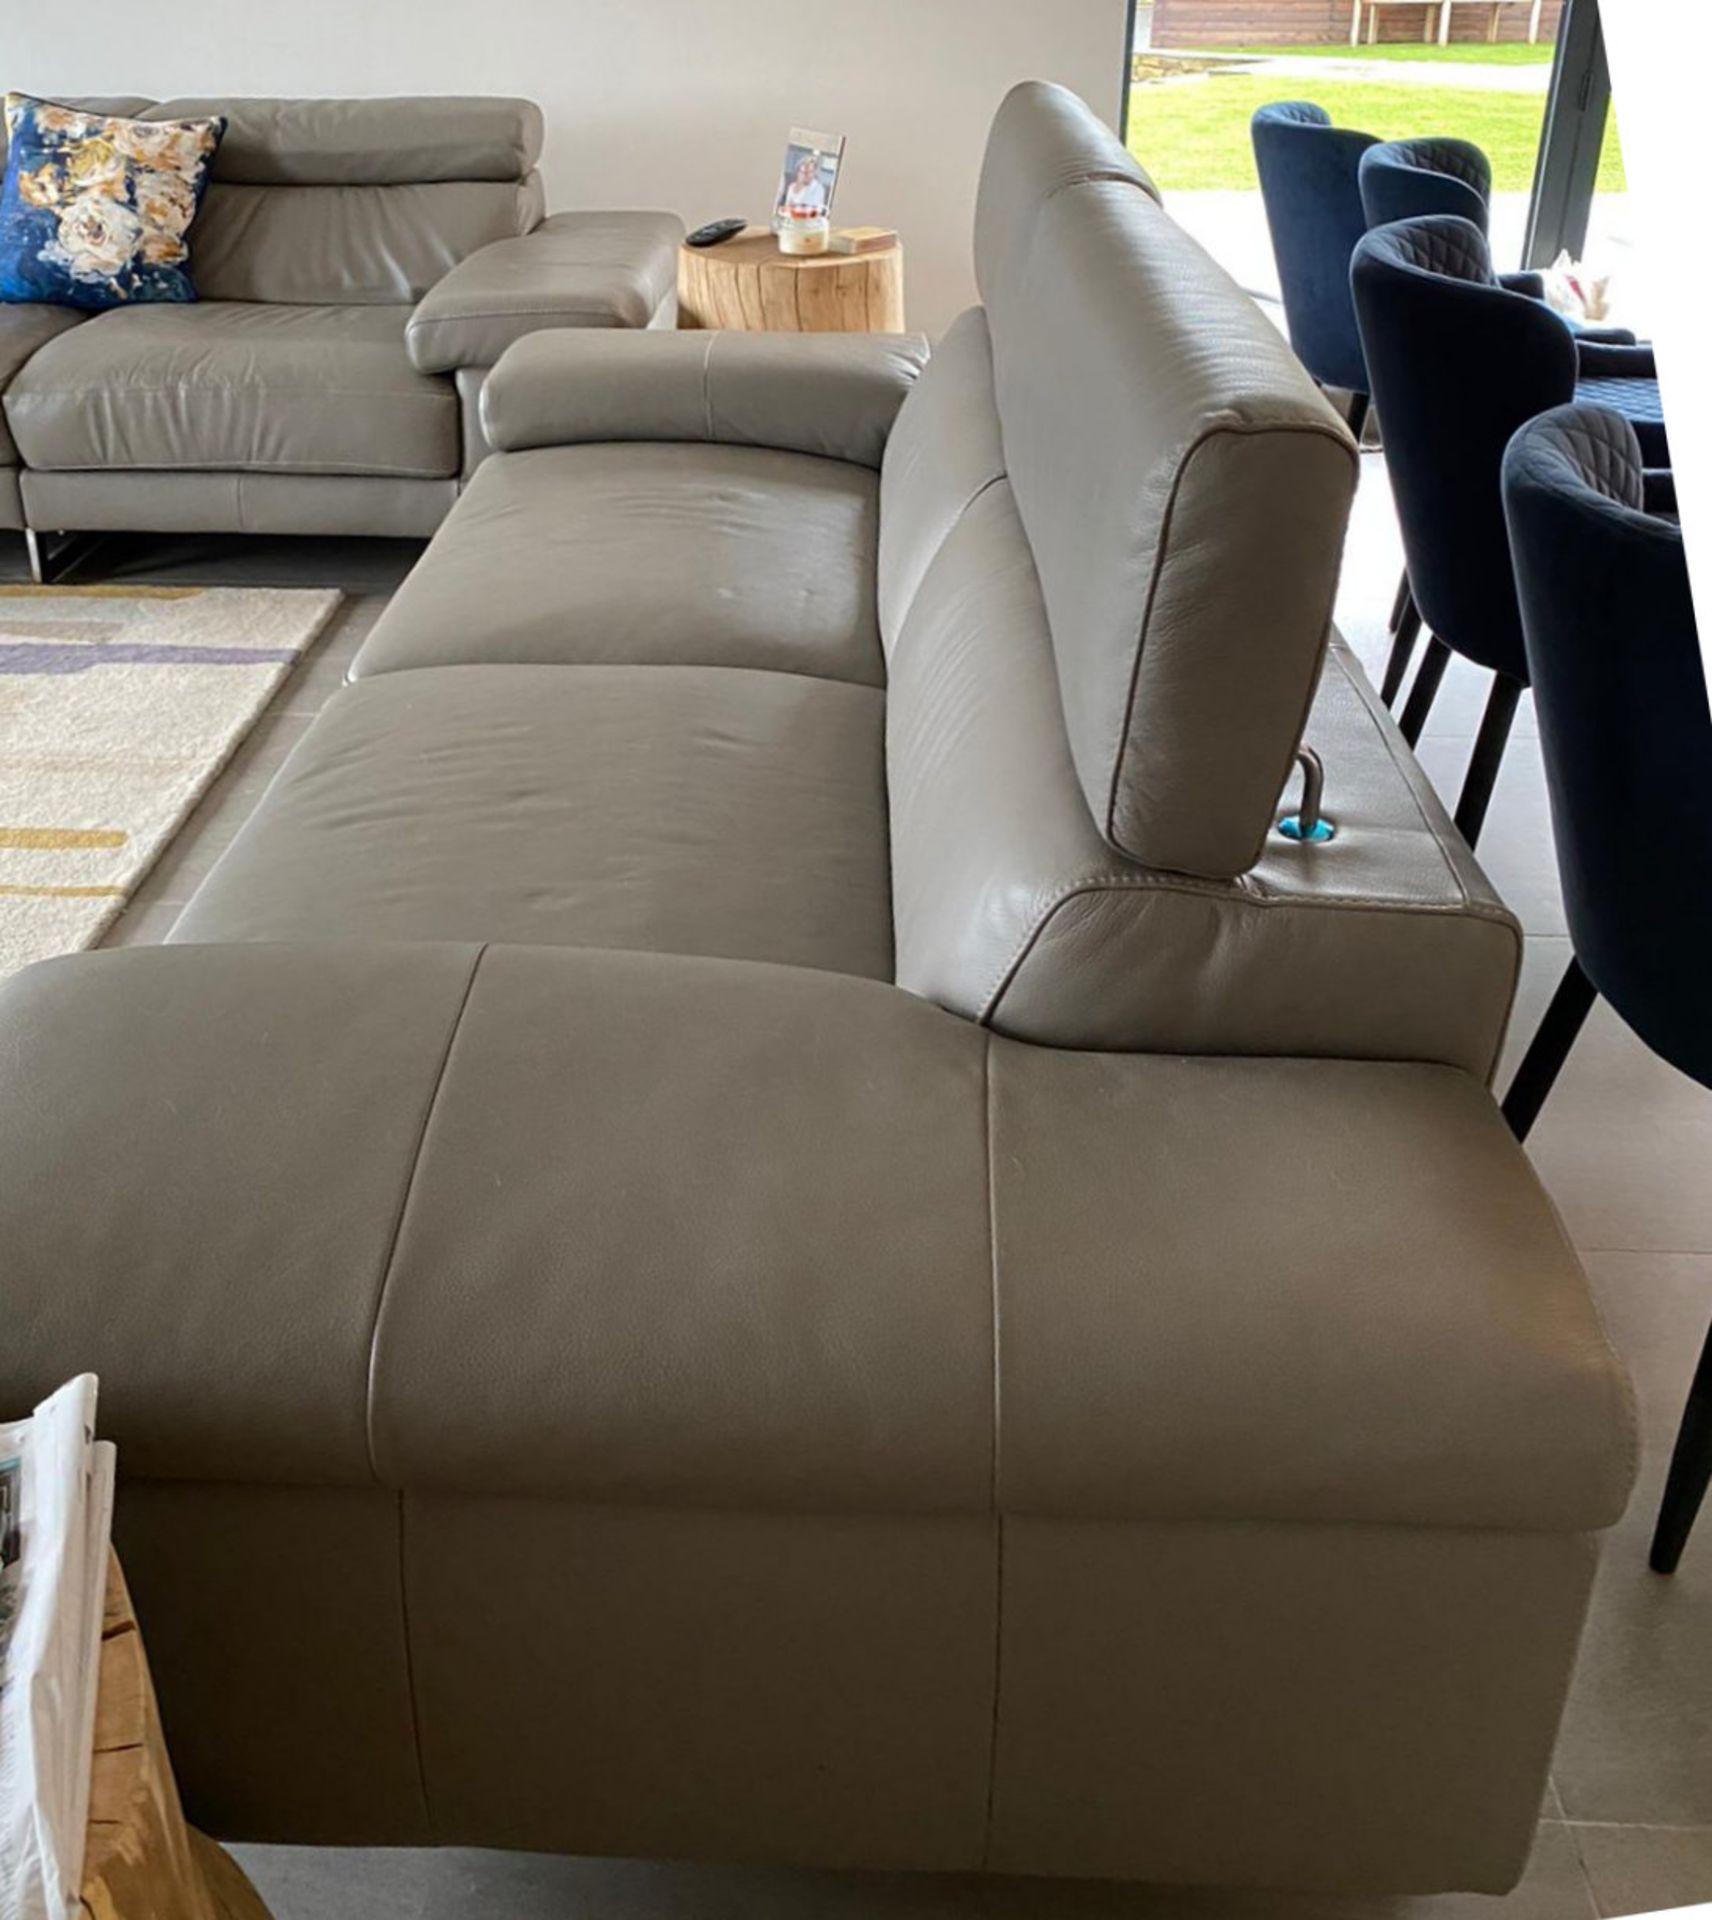 Natuzzi Editions Suite in Denver 10BK with No Contrast Stitching - Includes 3-Seater, 2-Seater and - Image 6 of 8